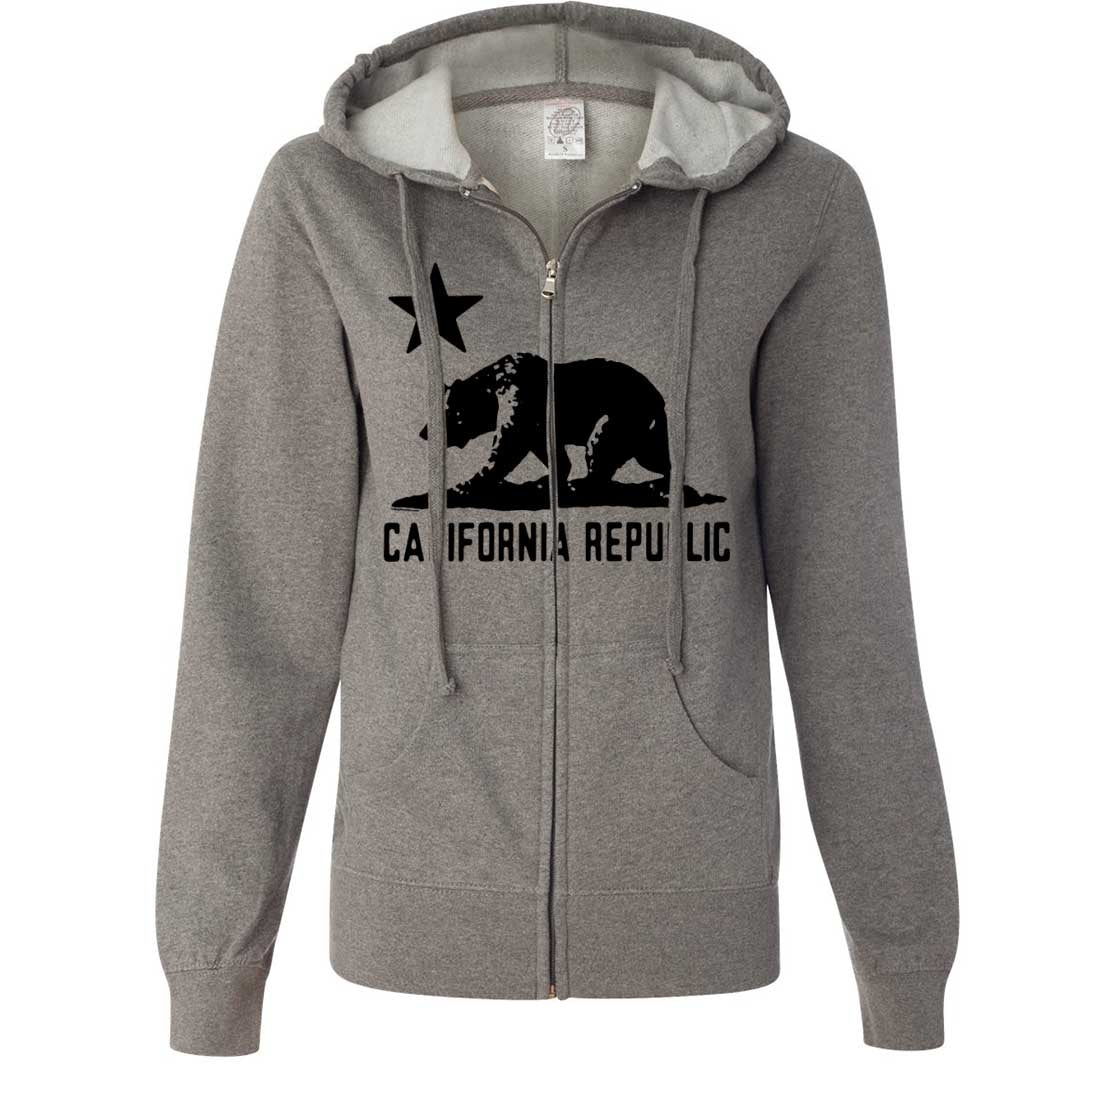 California Flag Oversize Black Silhouette Ladies Fitted Zip-Up Hoodie -  California Republic Clothes